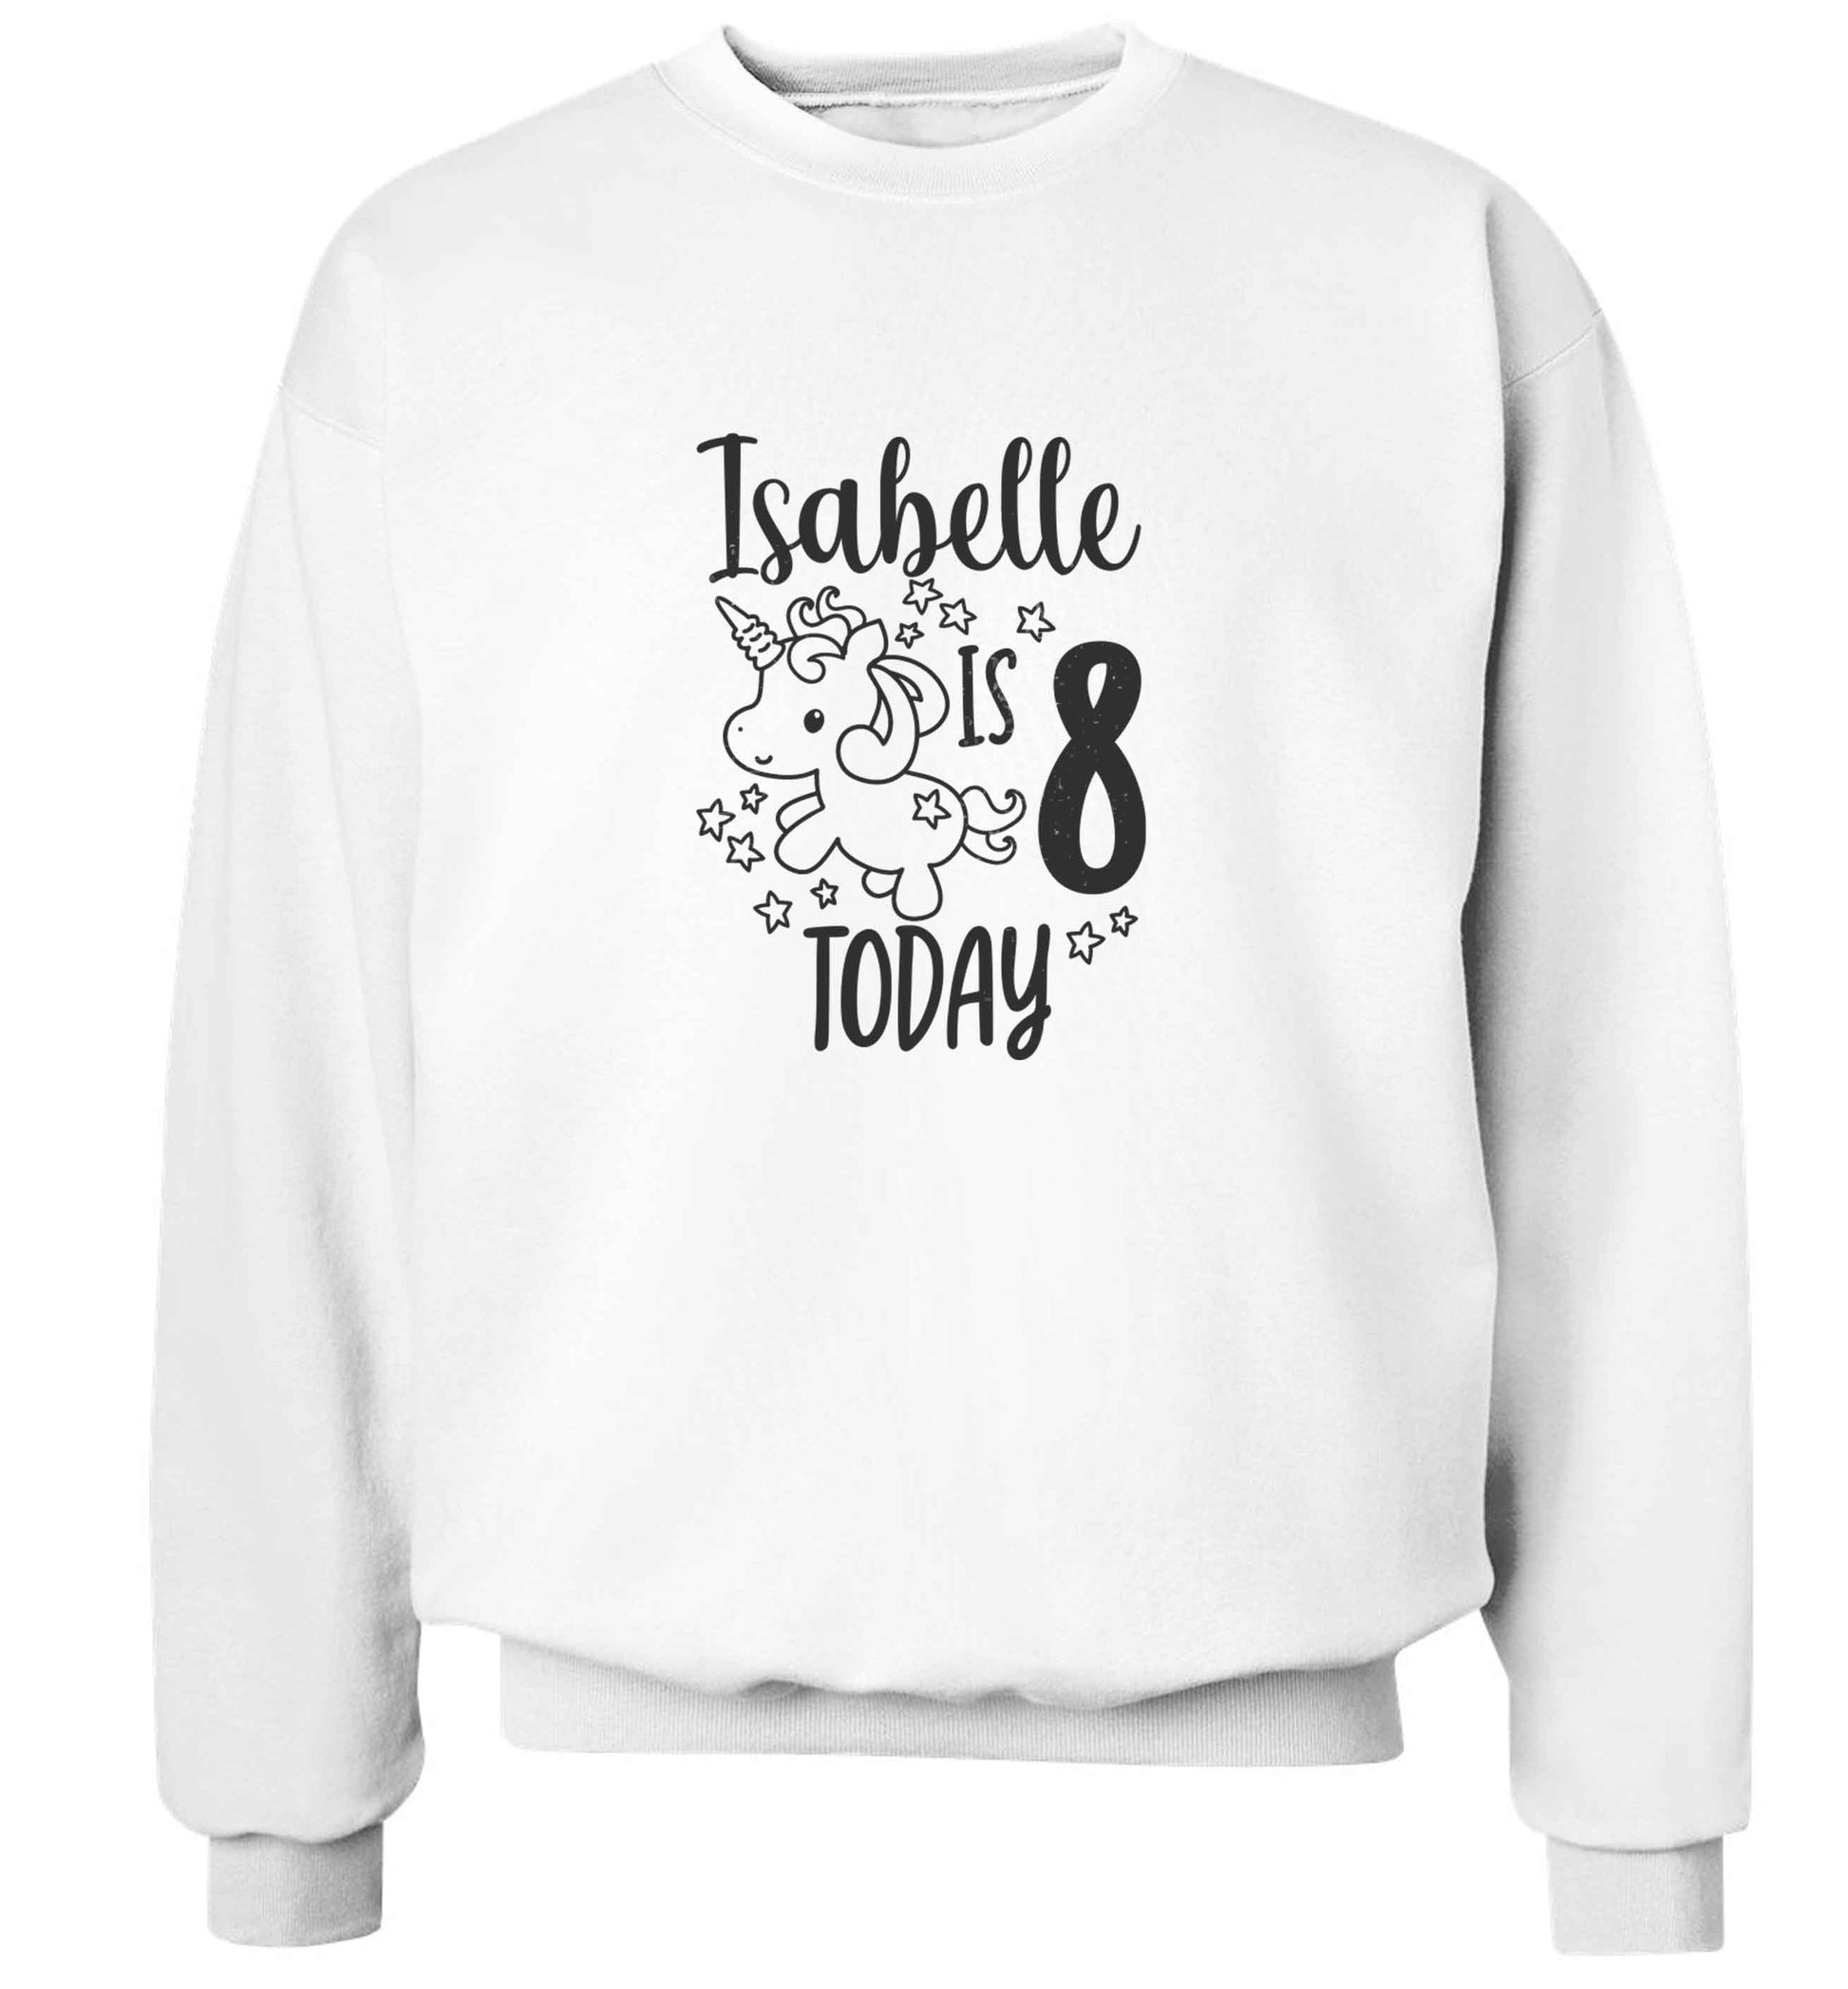 Today I am - Personalise with any name or age! Birthday unicorn adult's unisex white sweater 2XL